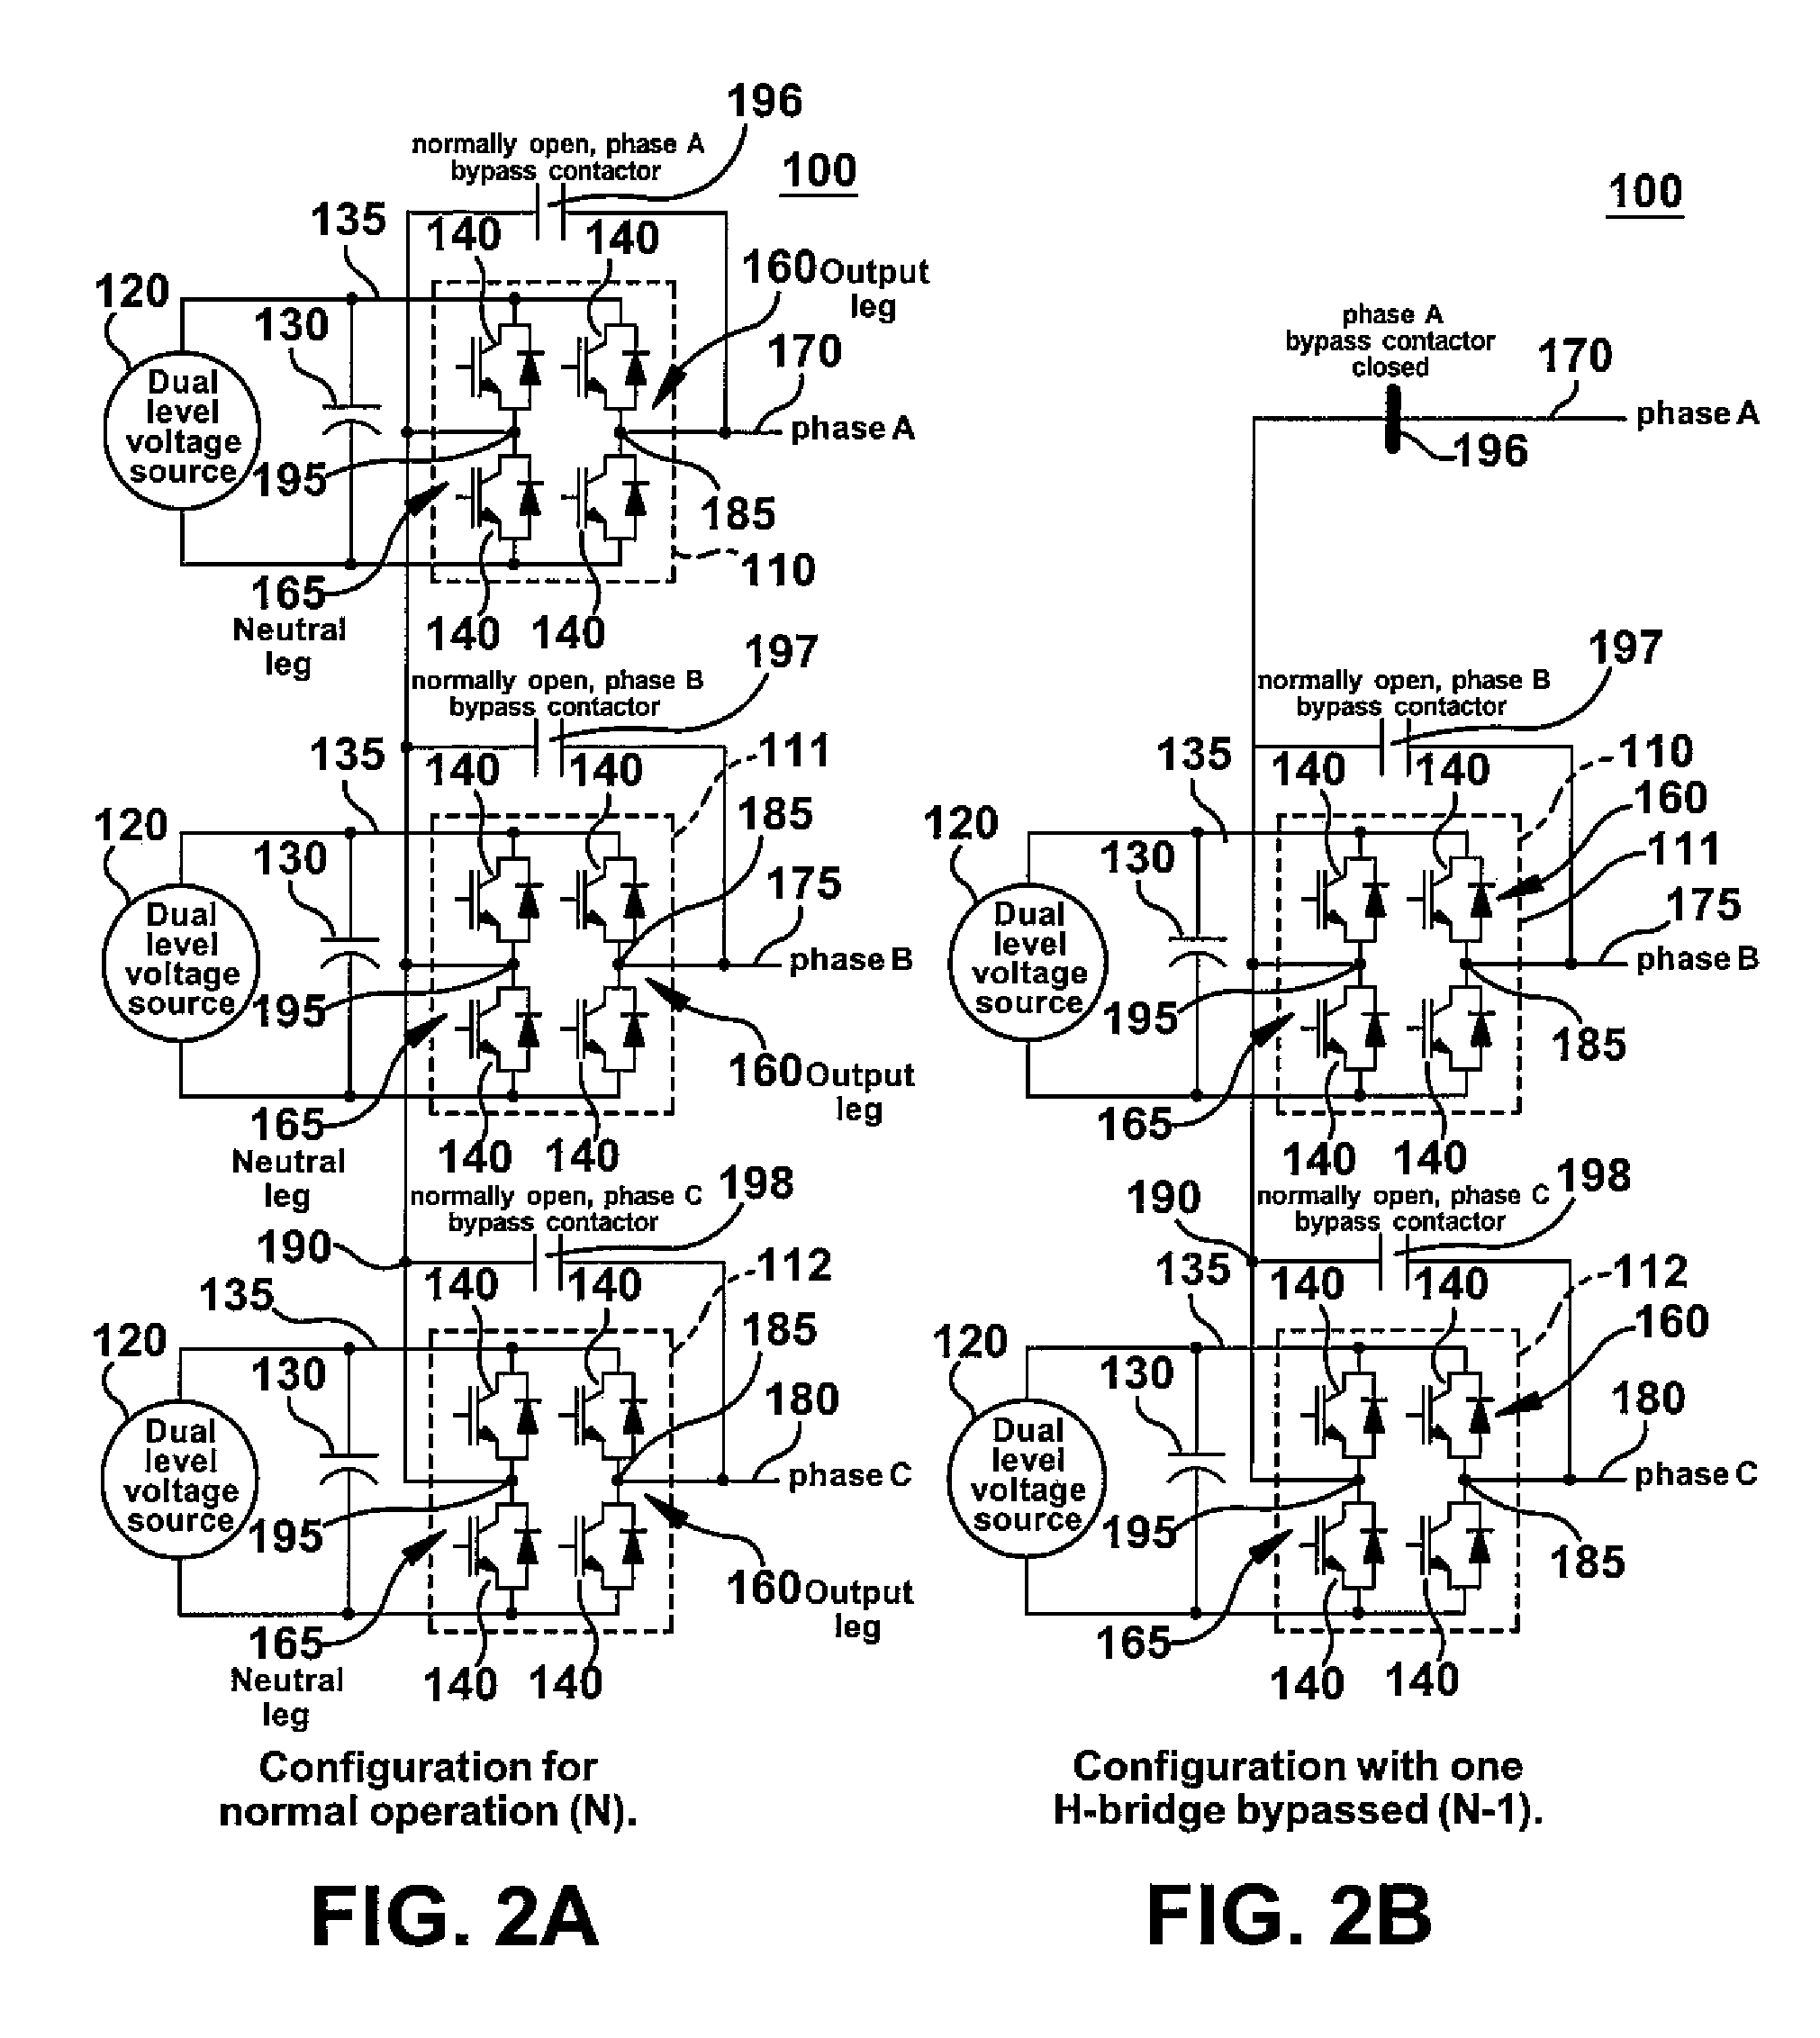 Dual voltage wye-connected H-bridge converter topology for powering a high-speed electric motor